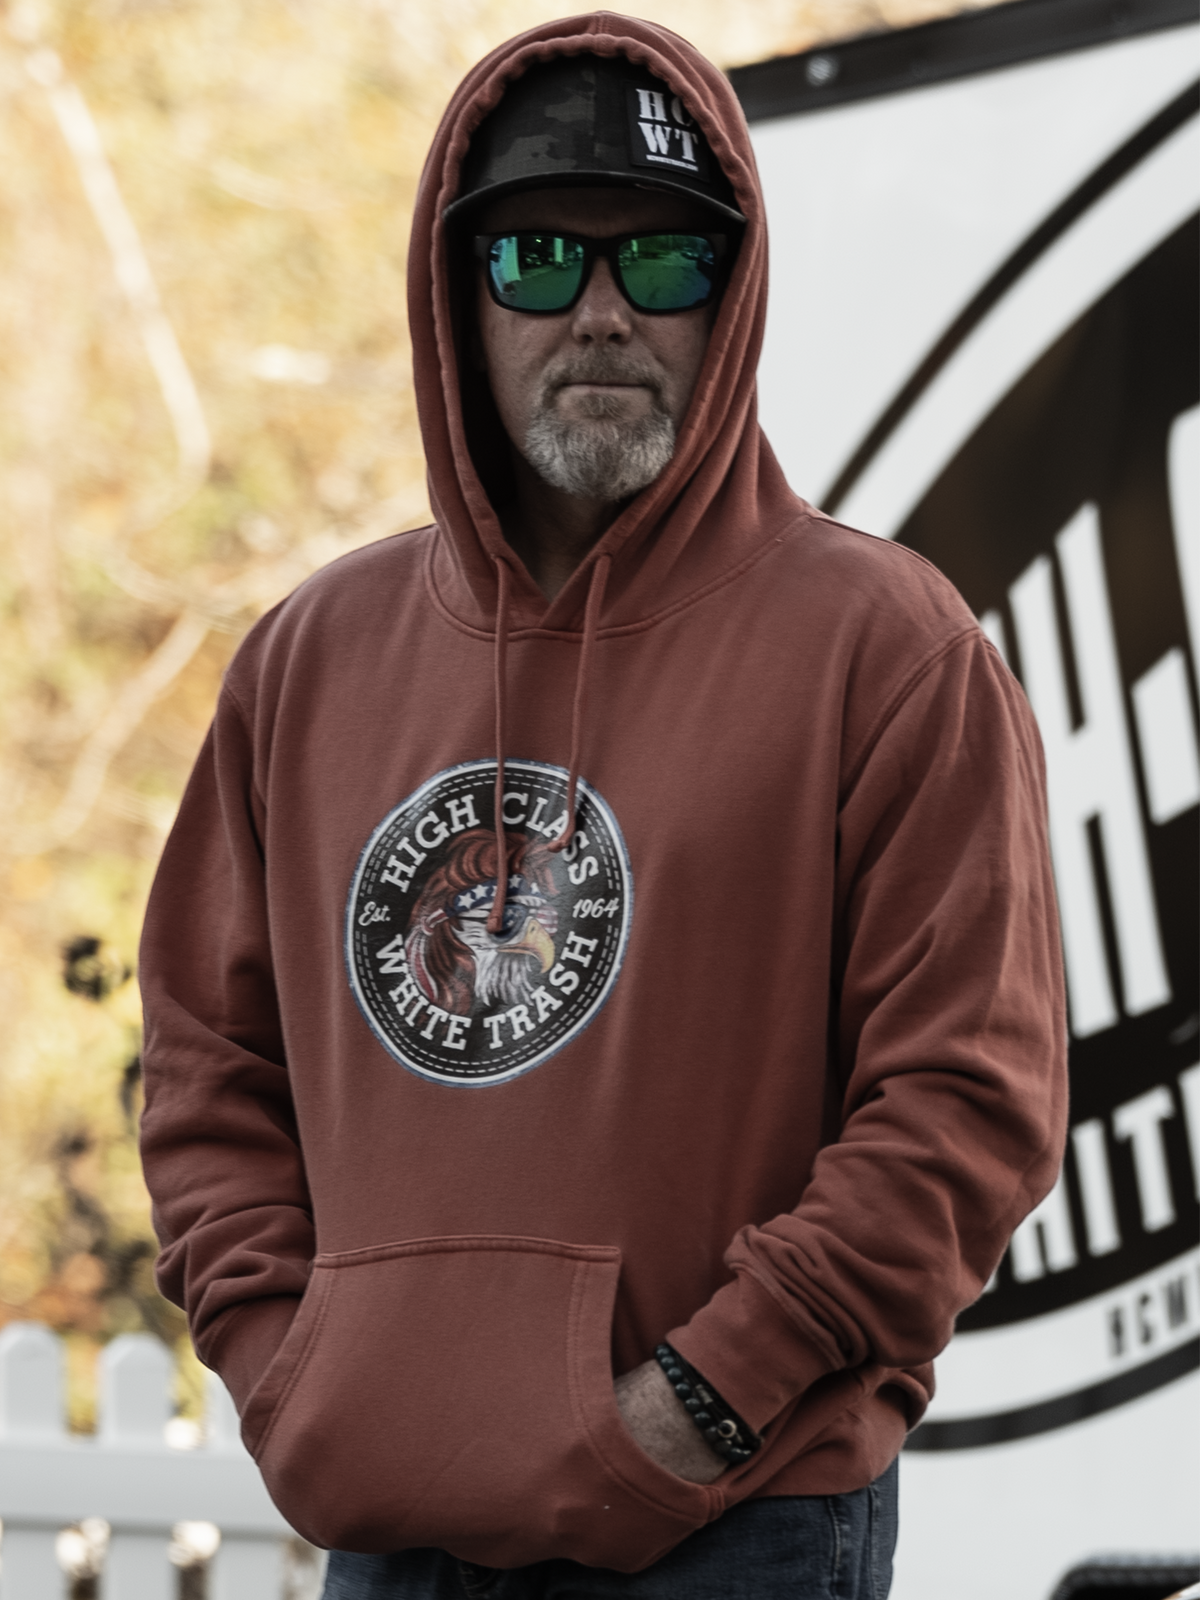 HCWT Seal Unisex Pullover Hoodie (9 Color Options)